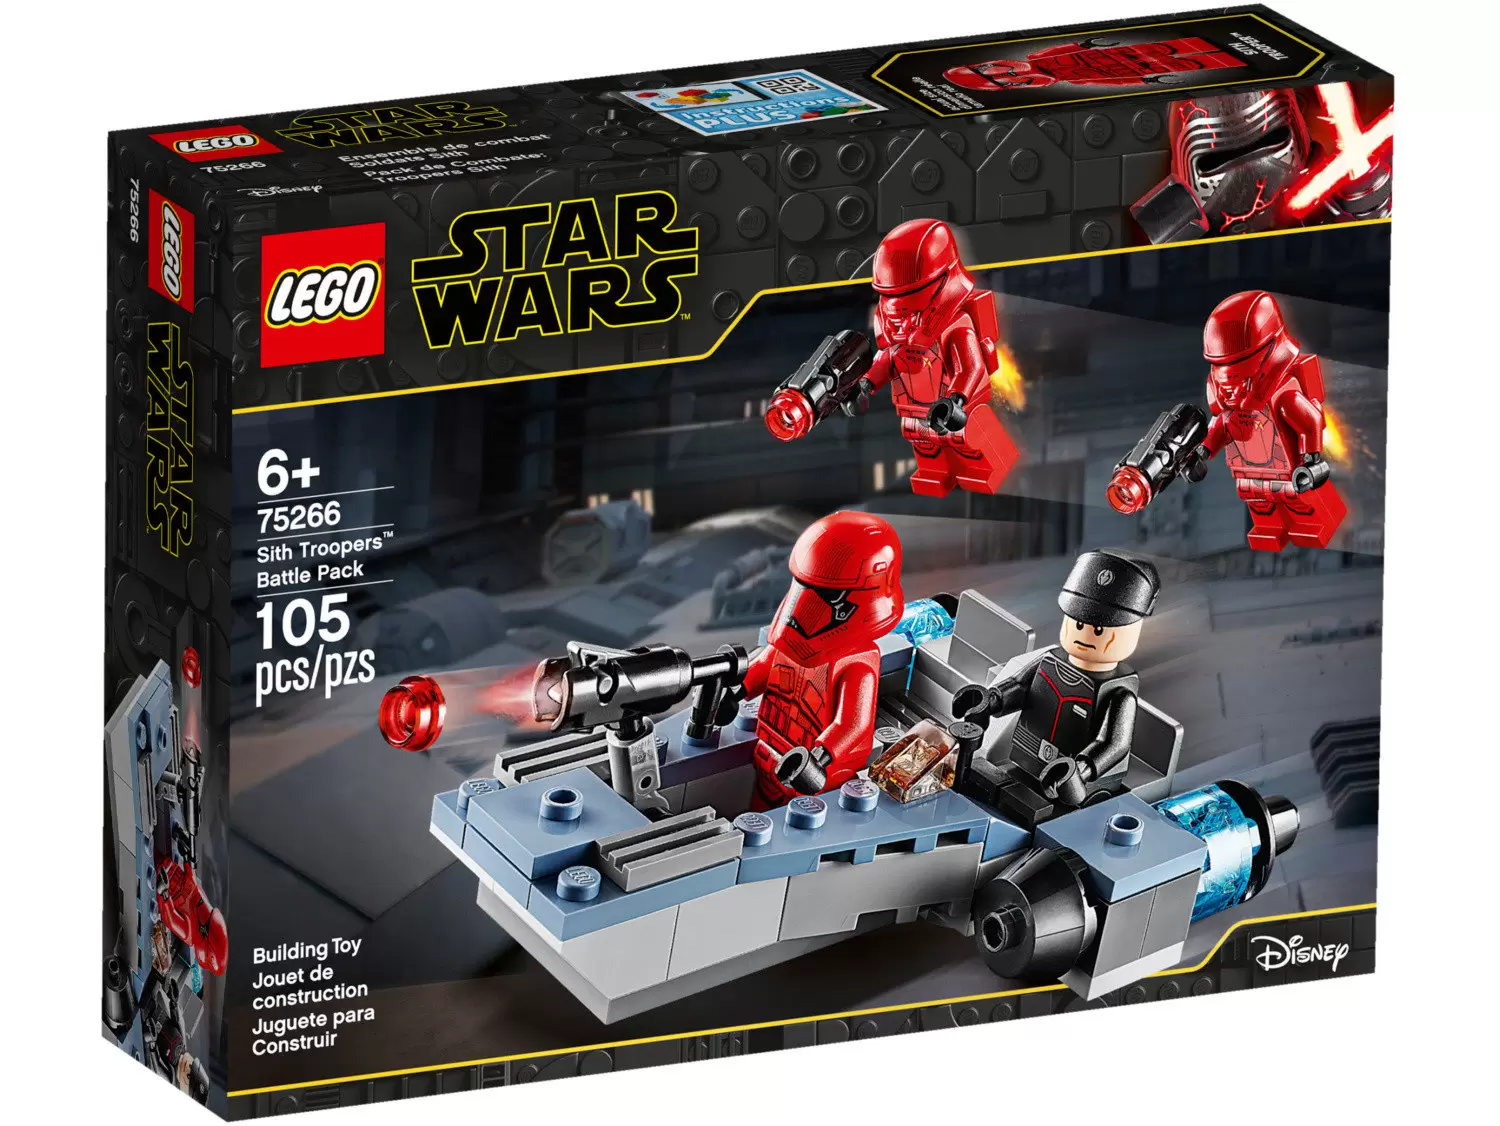 LEGO Star Wars - Sith Troopers Battle Pack